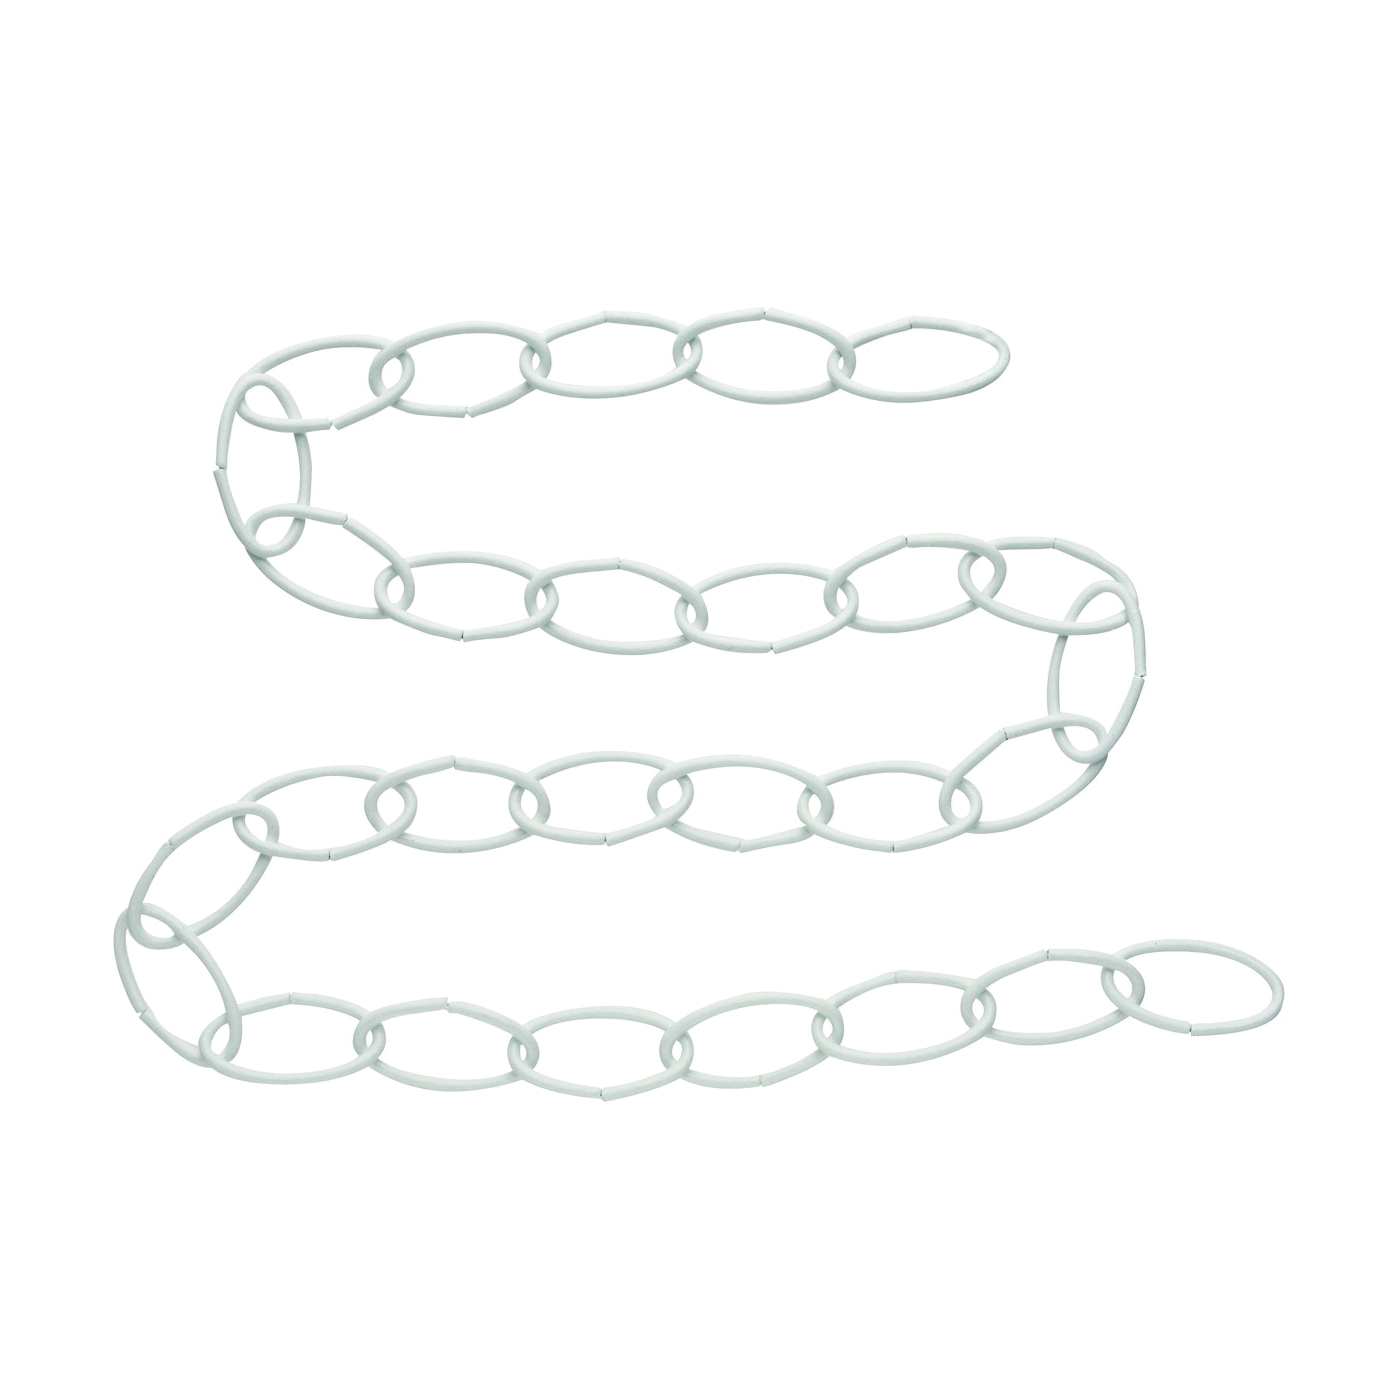 V2662 Series N275-016 Extension Chain, 36 in L, Steel, White